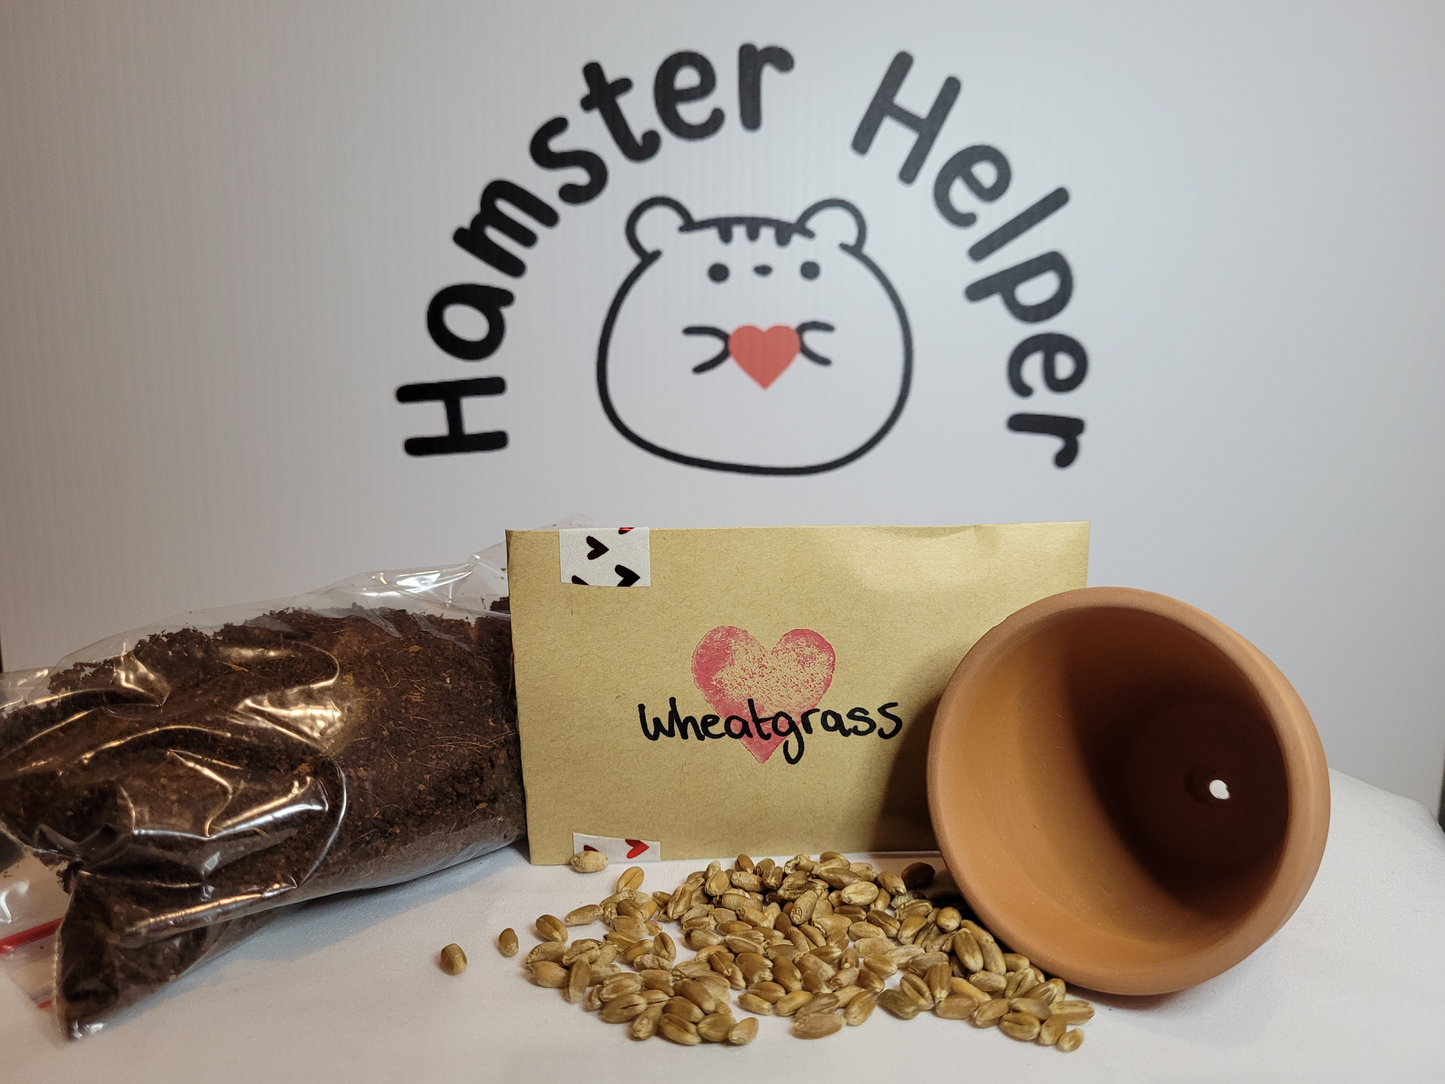 The hamster safe wheatgrass microgreen kit containing wheagrass seeds, a terracotta pot, and some hamster safe soi.